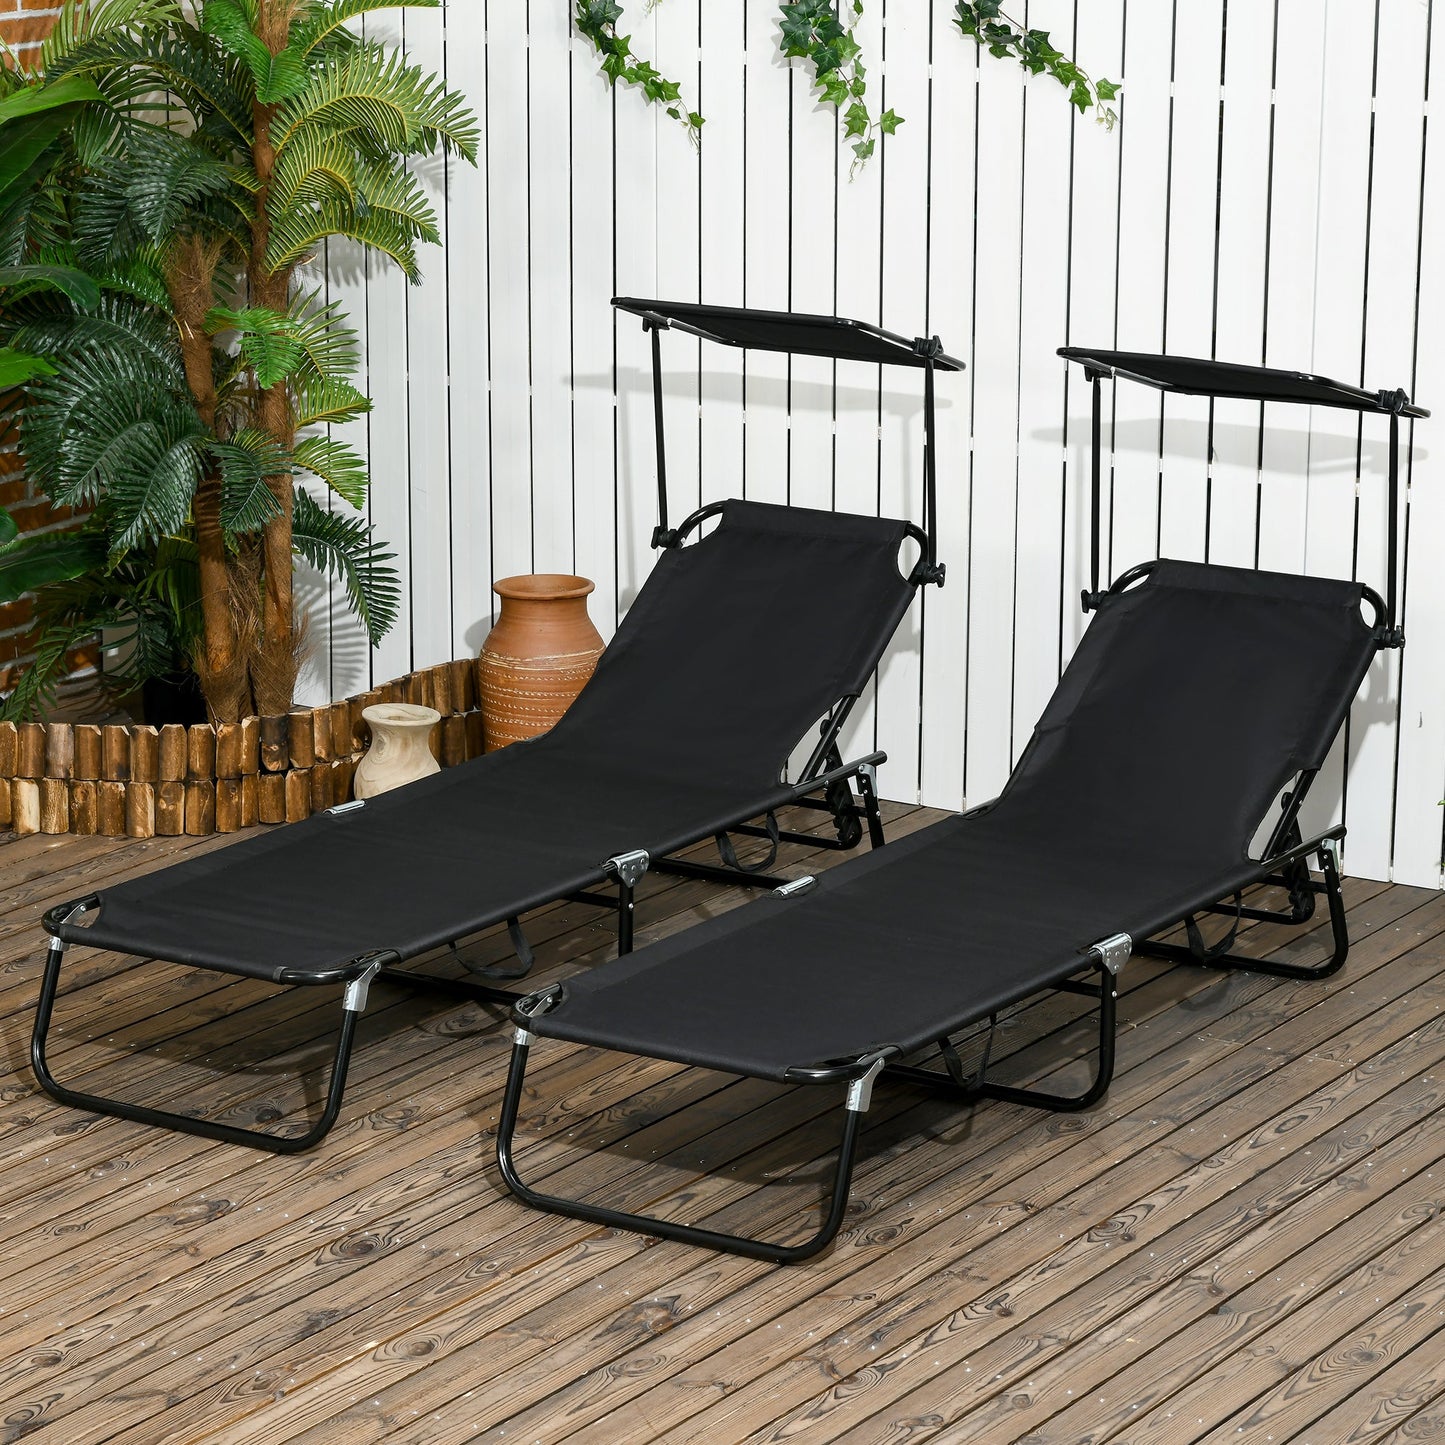 -Outsunny Folding Chaise Lounge Pool Chairs, Set of 2 Outdoor Sun Tanning Chairs with Sunshade Face Guard, Five-Position Reclining Back, Steel Frame & Oxford Fabric for Beach, Yard, Patio, Black - Outdoor Style Company